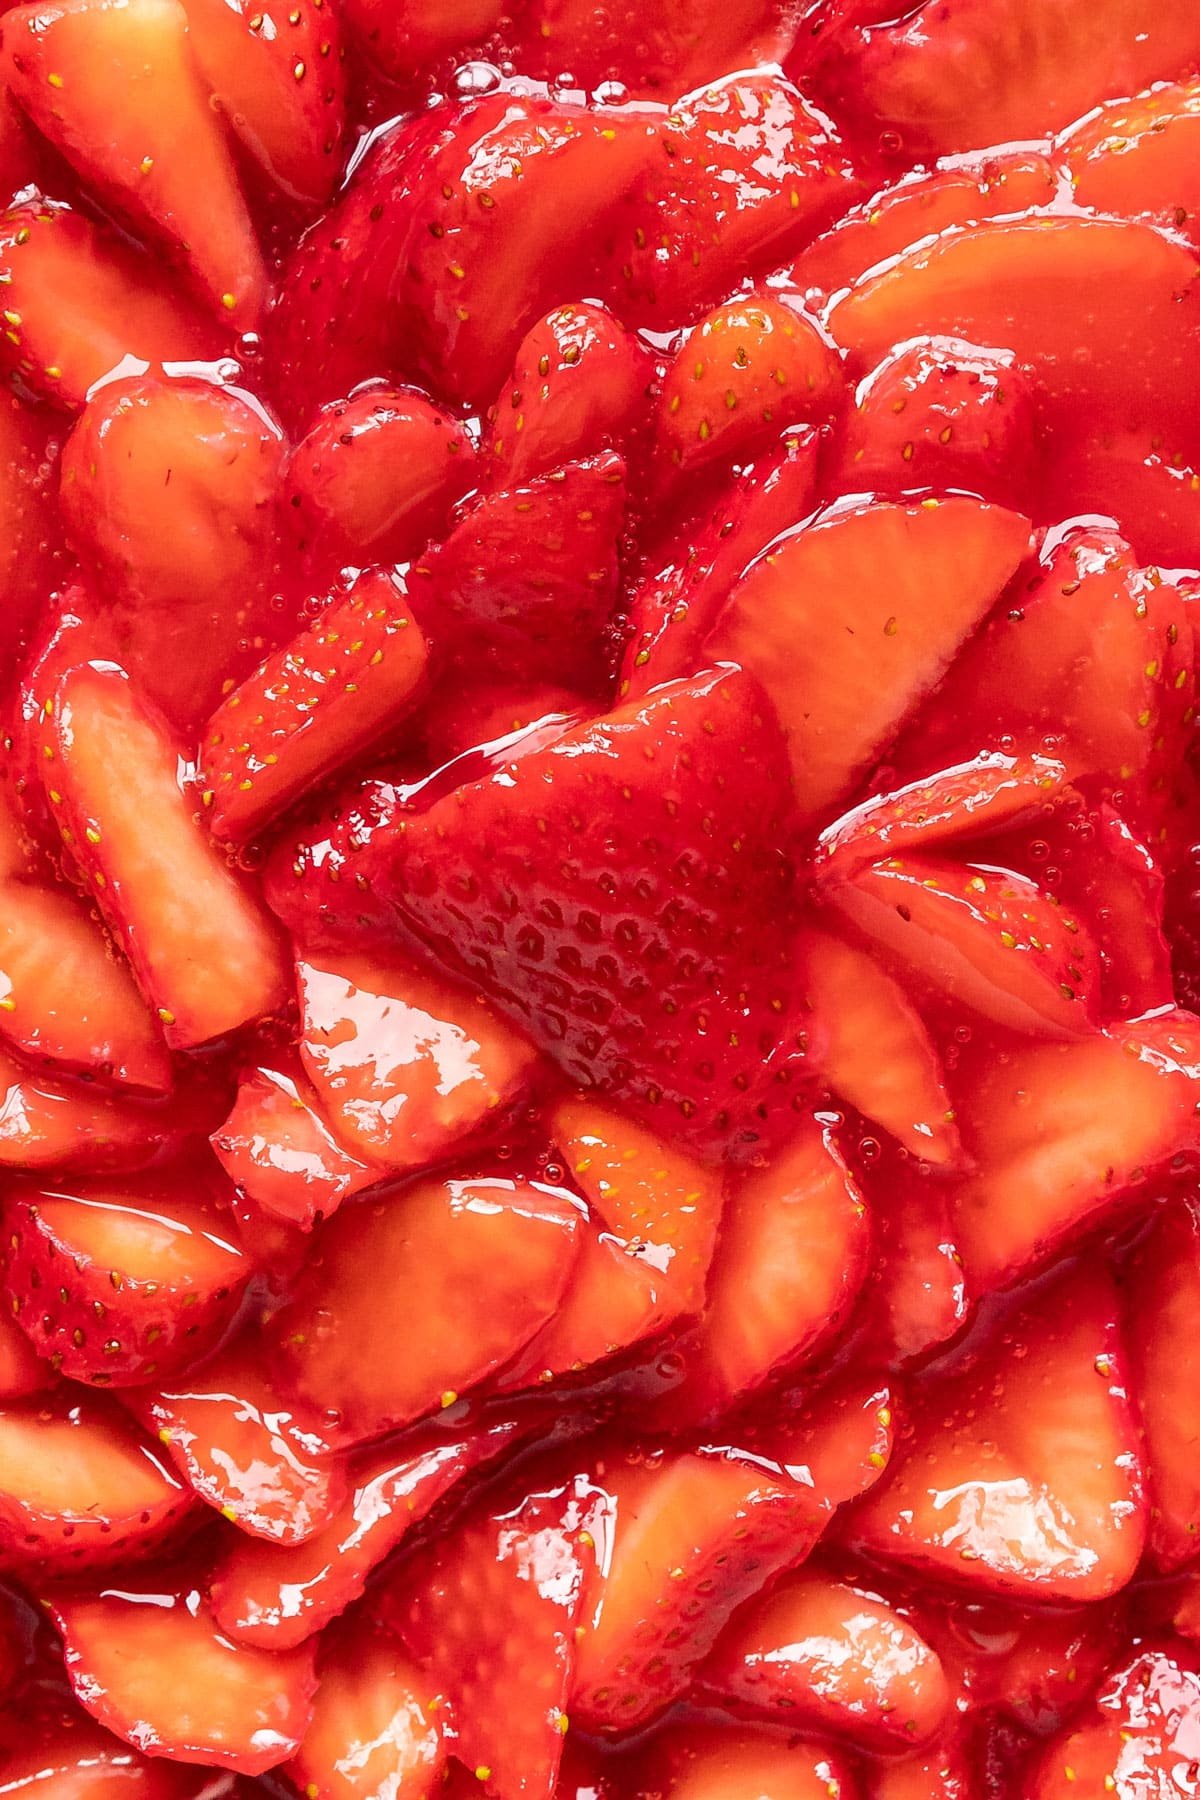 A close up image of the strawberries shingled on top of the pie.